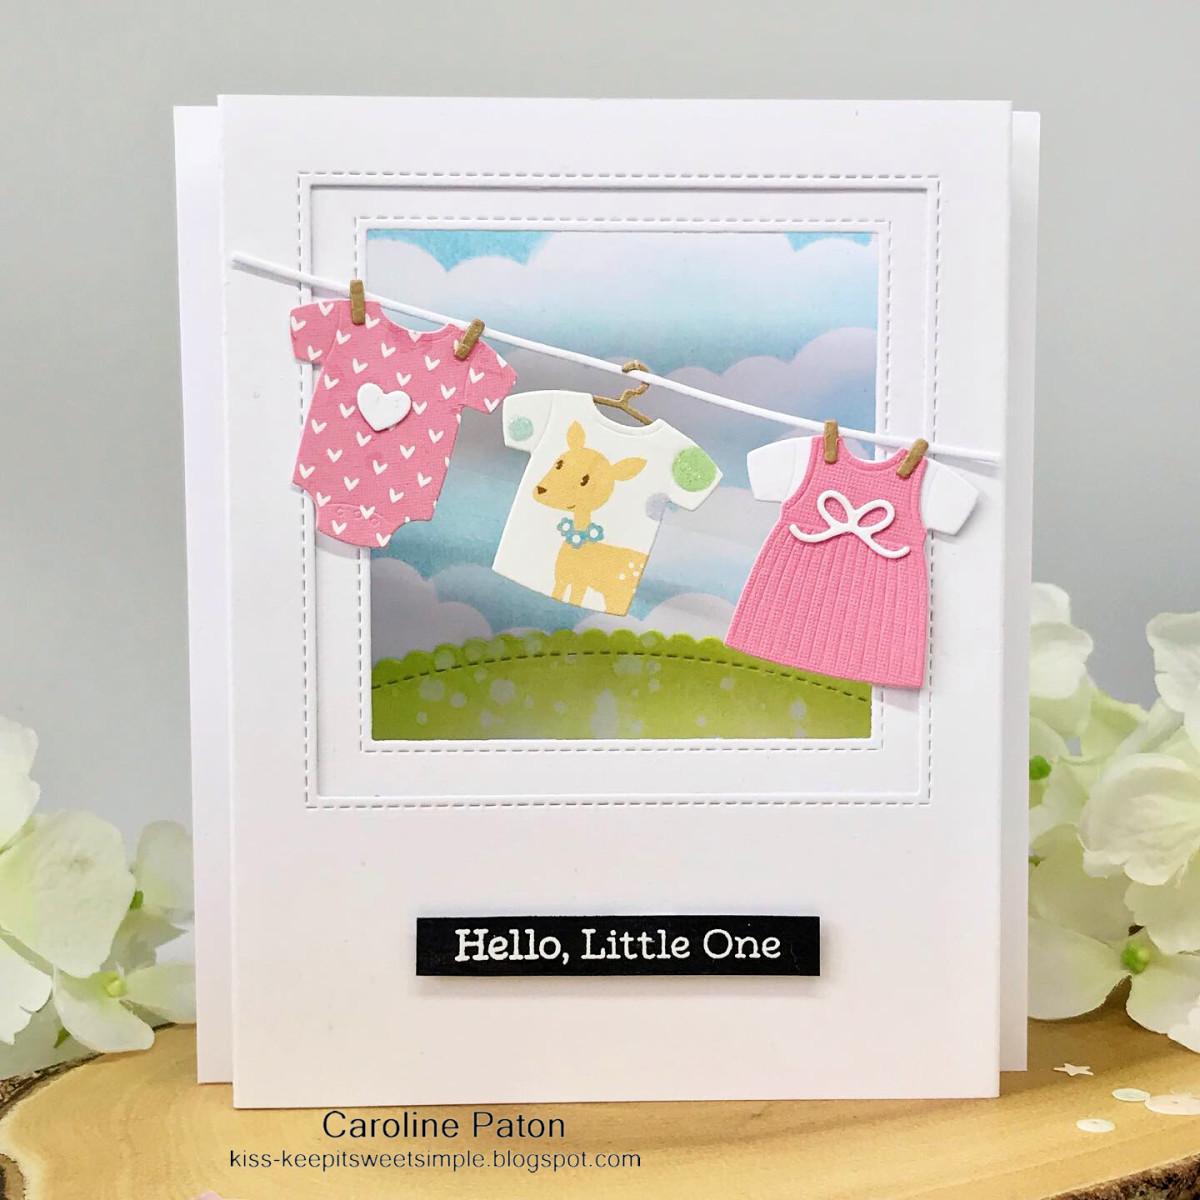 Pop up shadow box cards are always popular Once you understand how to complete these cards, you are going to want to create more of them